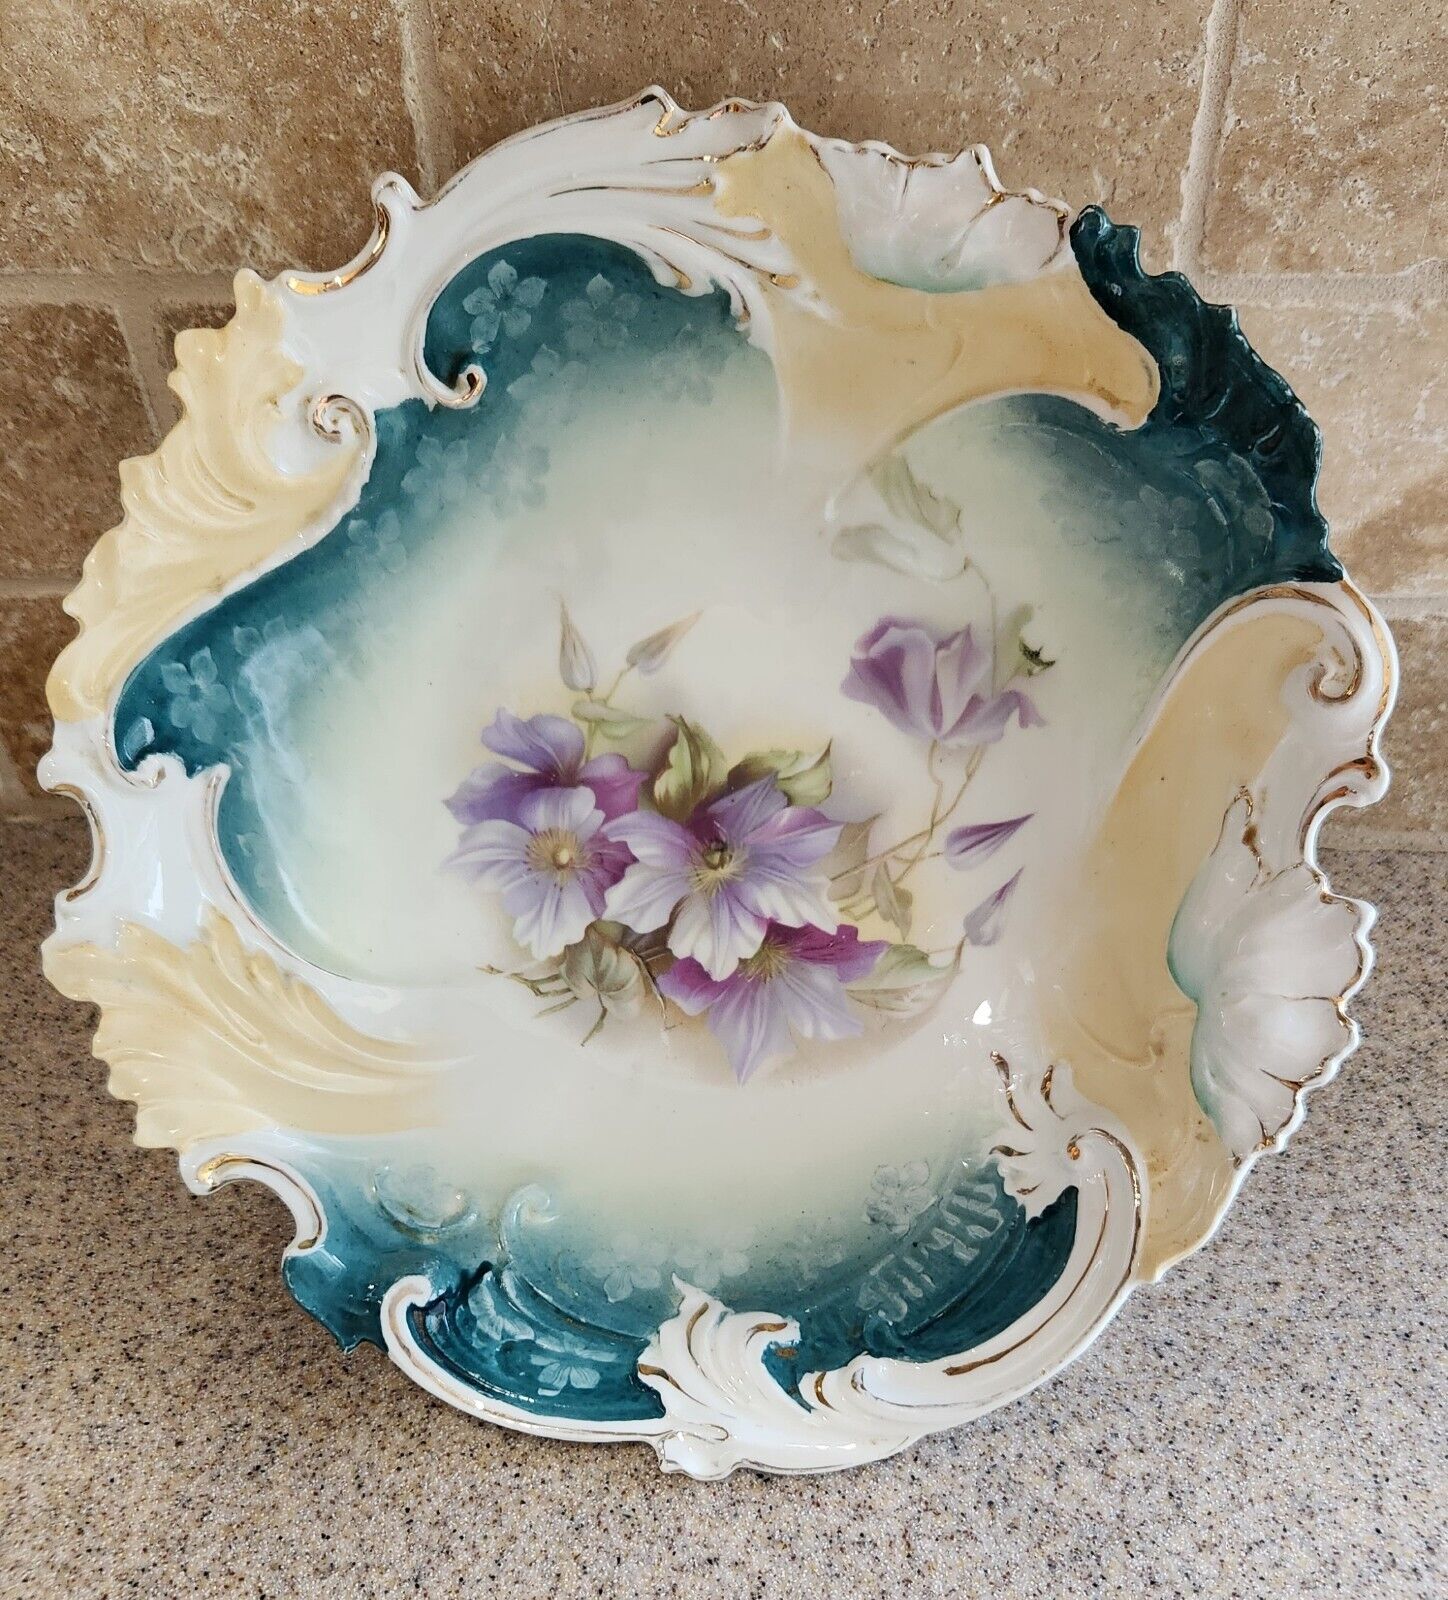 Antique RS Prussia Porcelain Bowl - Hand Painted- Floral Design- Teal and Purple